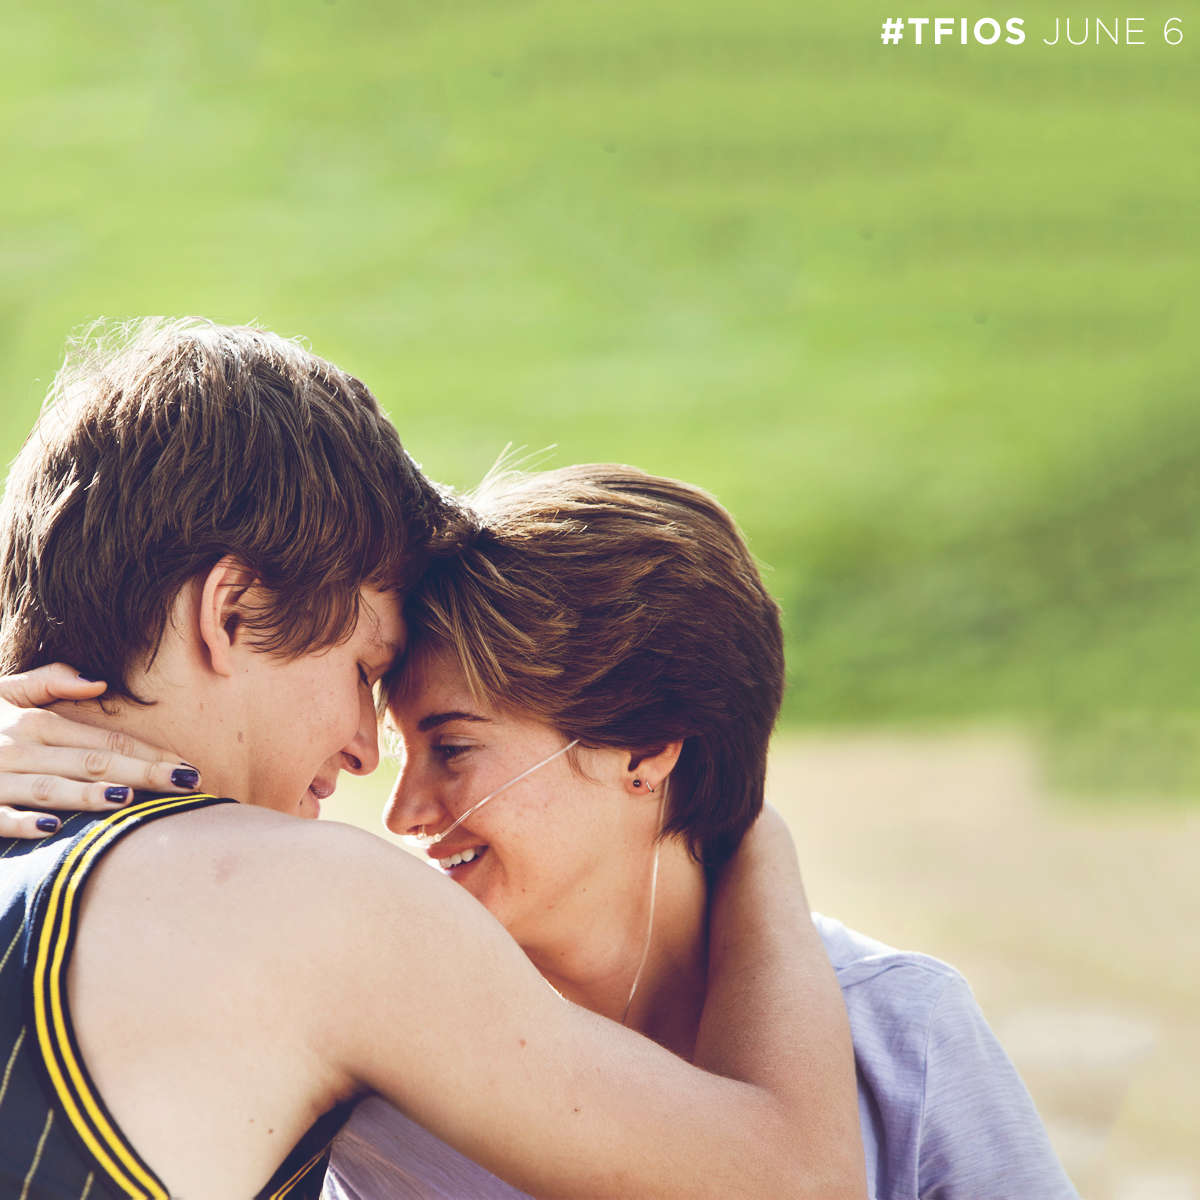 The Fault In Our Stars - Movie Review on My Pocketful of Thoughts; http://mypocketfulofthoughts.com/